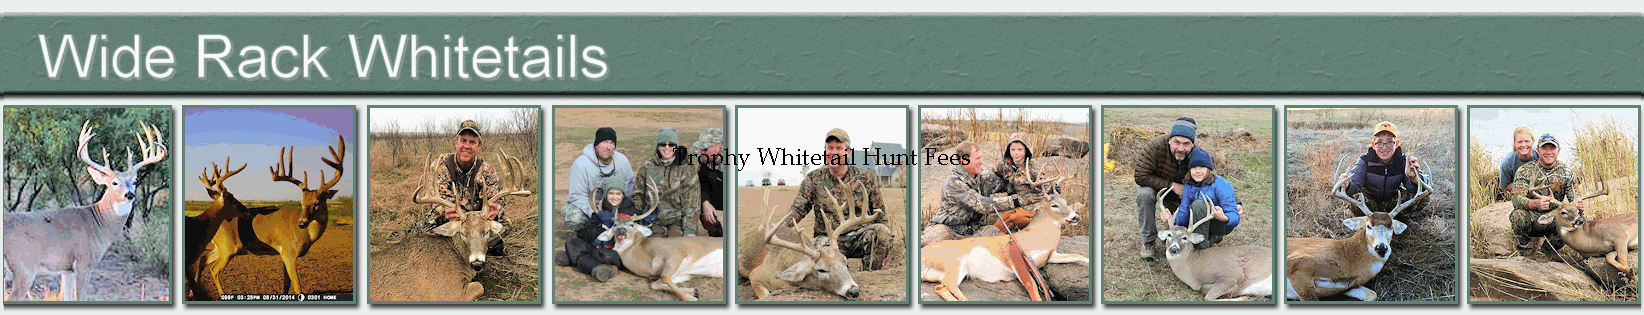 Trophy Whitetail Hunt Fees